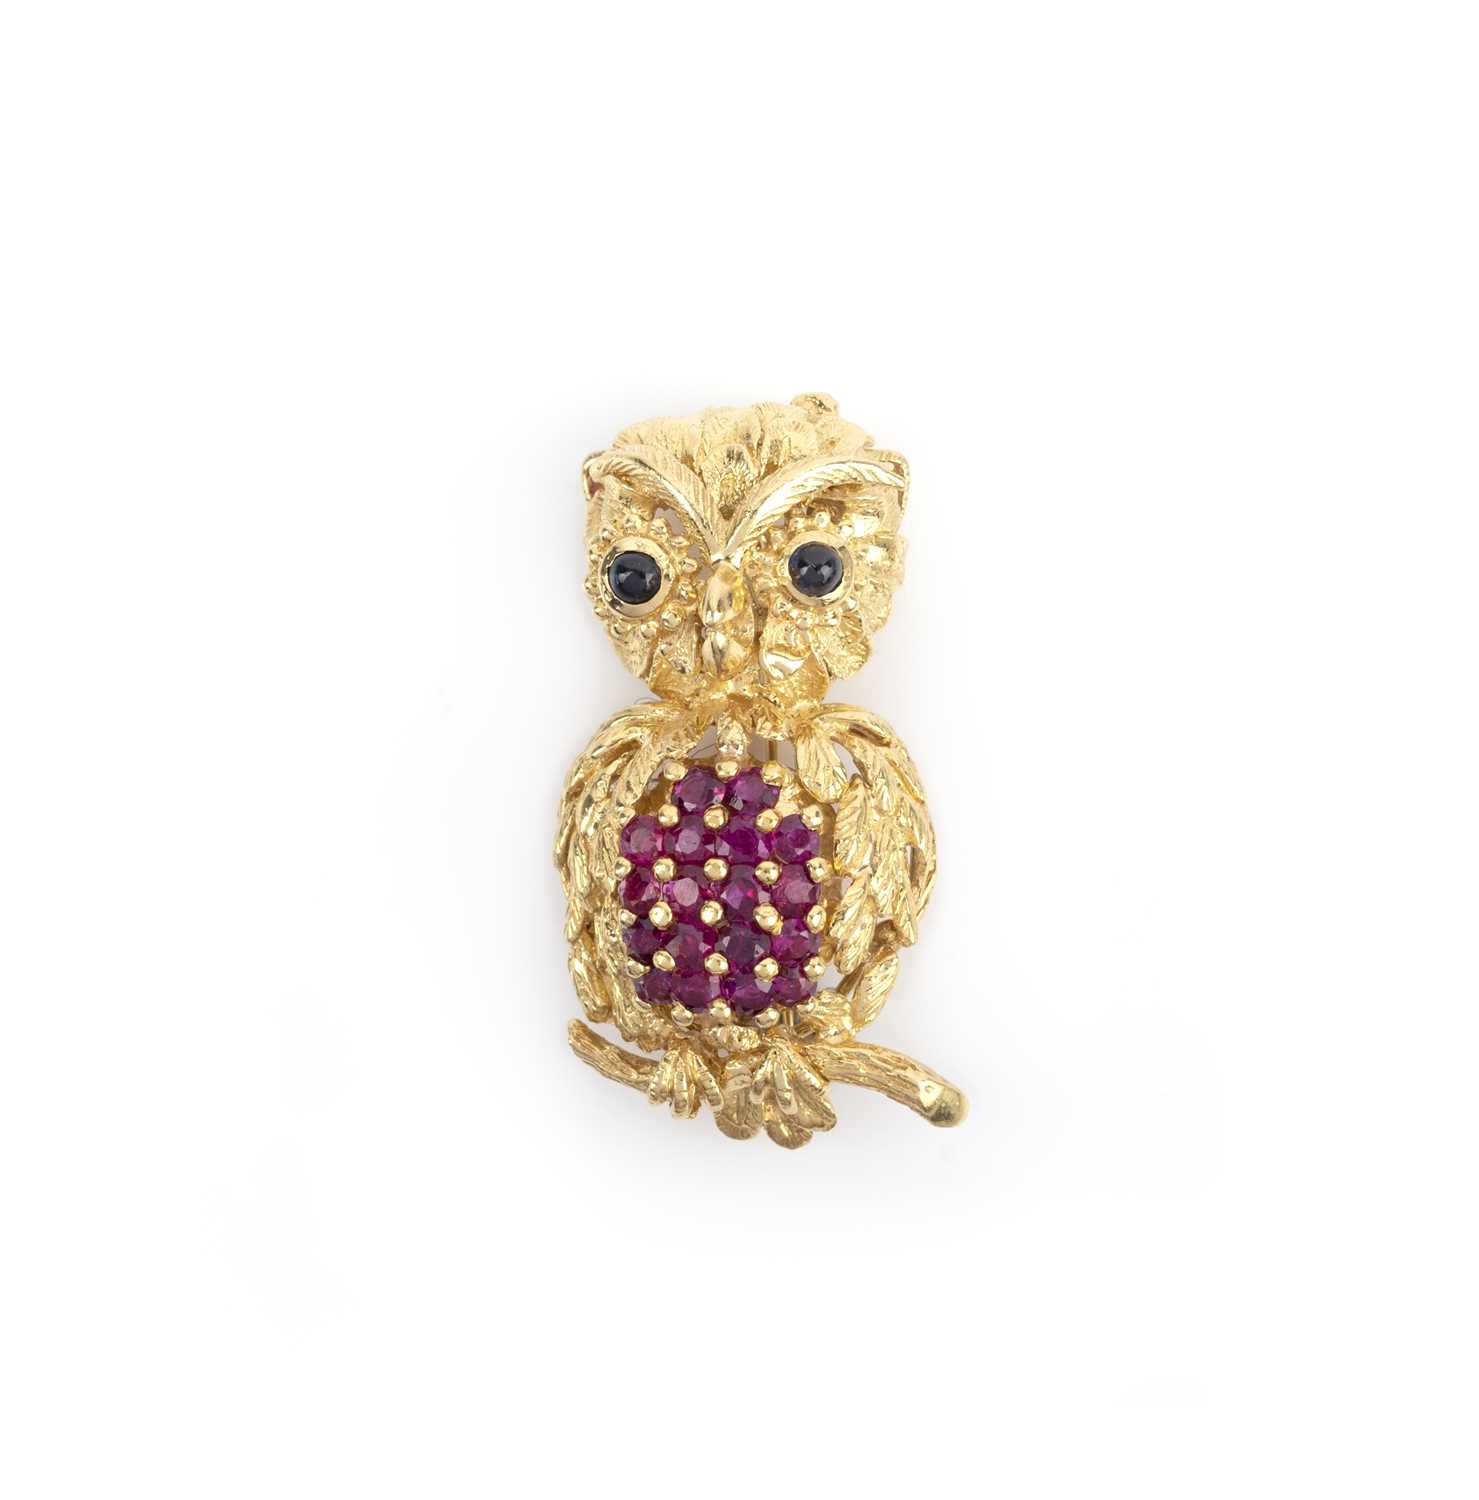 A gold, ruby and sapphire brooch, 1960s, in textured gold with circular cut rubies and cabochon